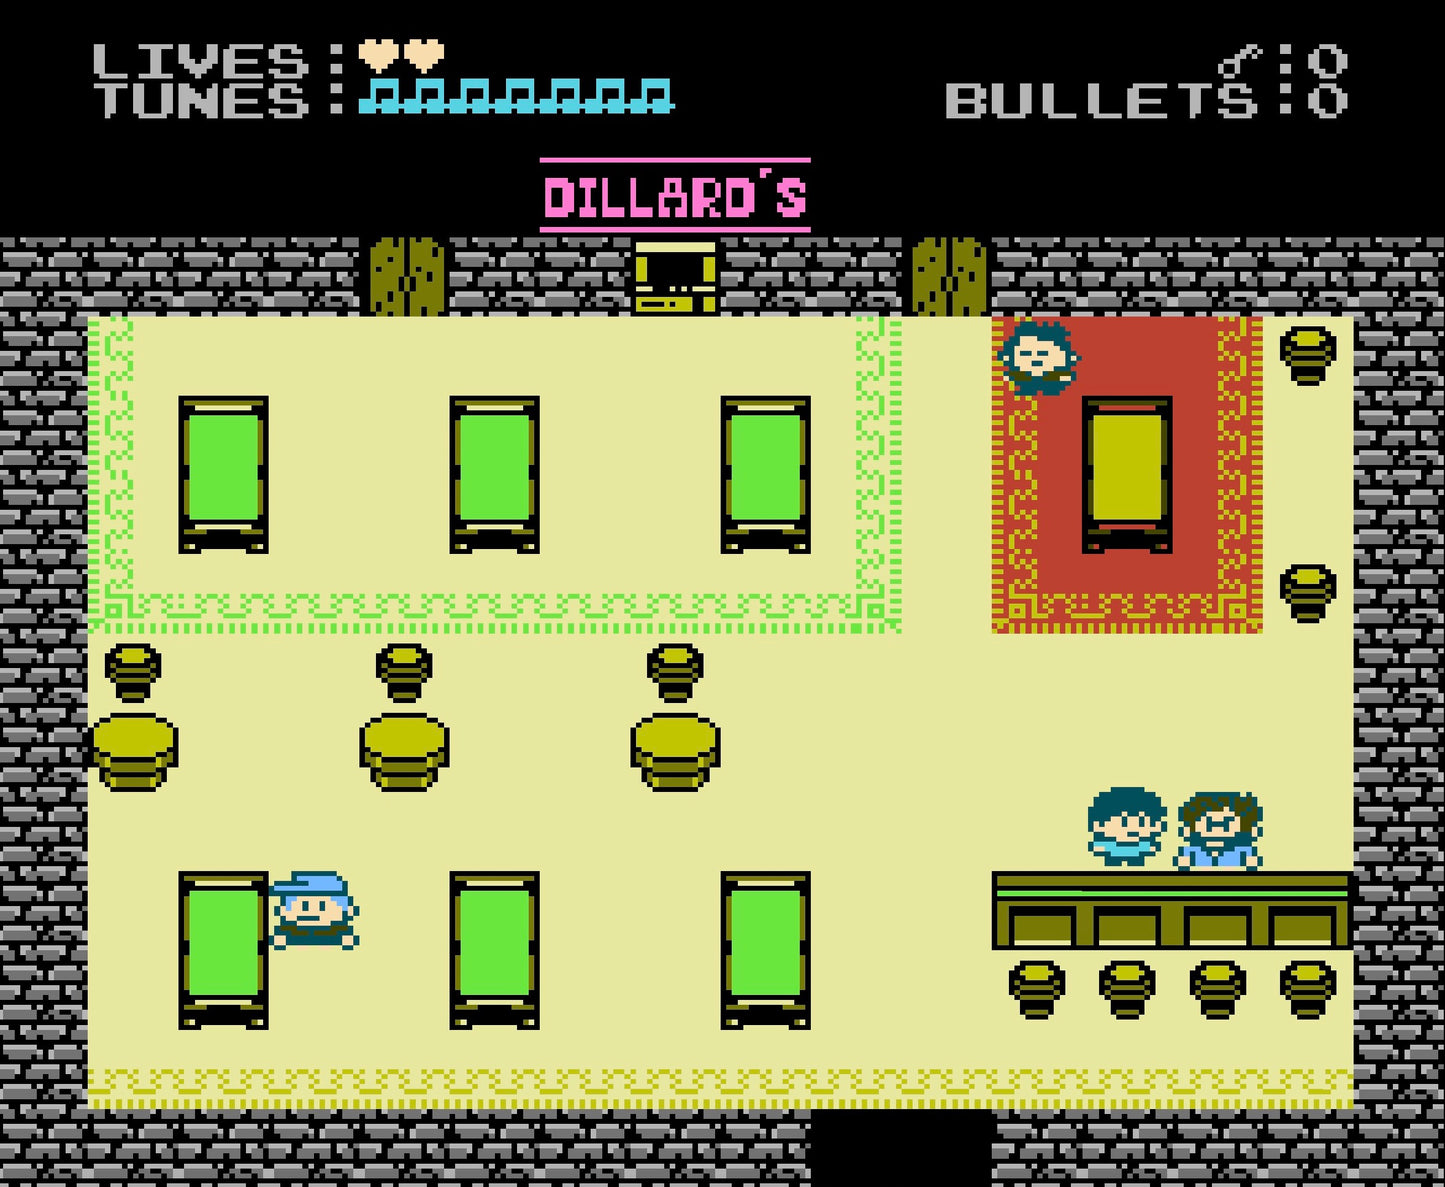 Jim & Dill  The Legend of Weed N' Stiff - NES Release Standard & Silver